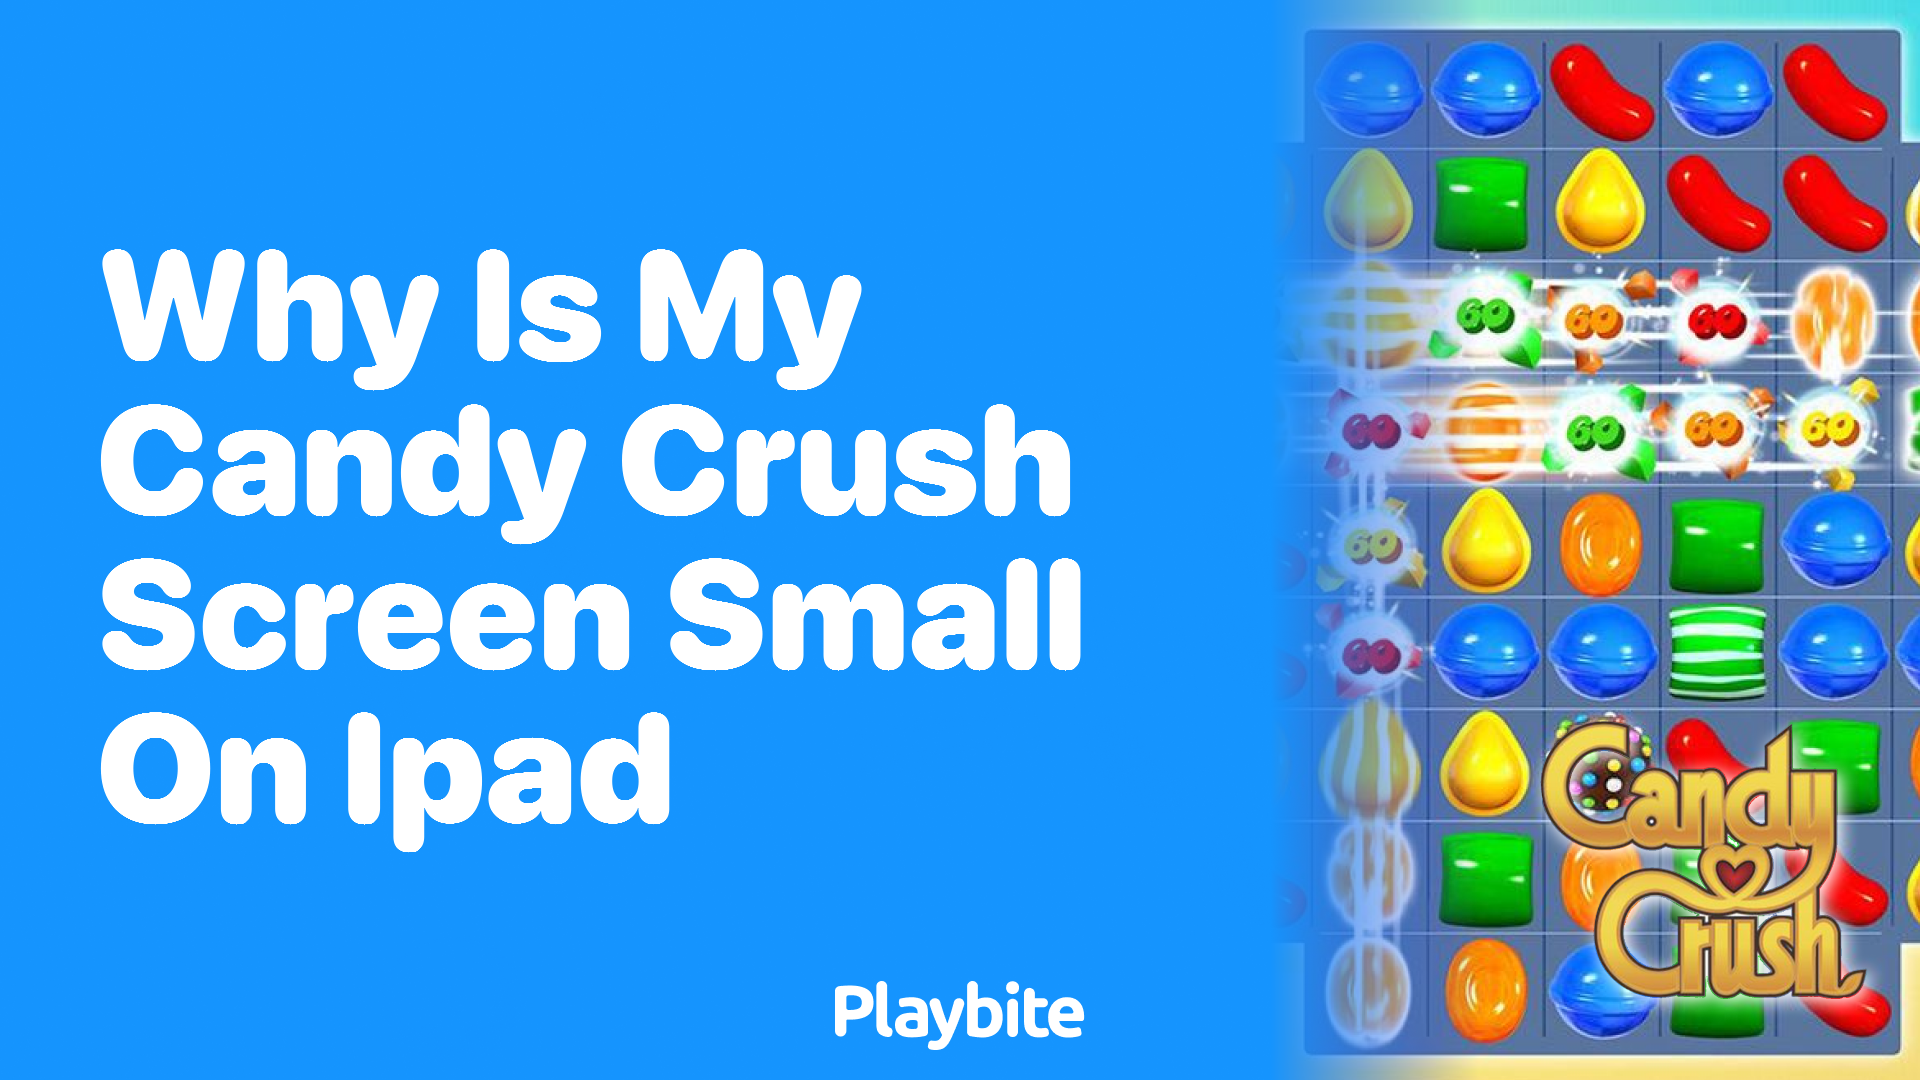 Why Is My Candy Crush Screen Small on iPad?